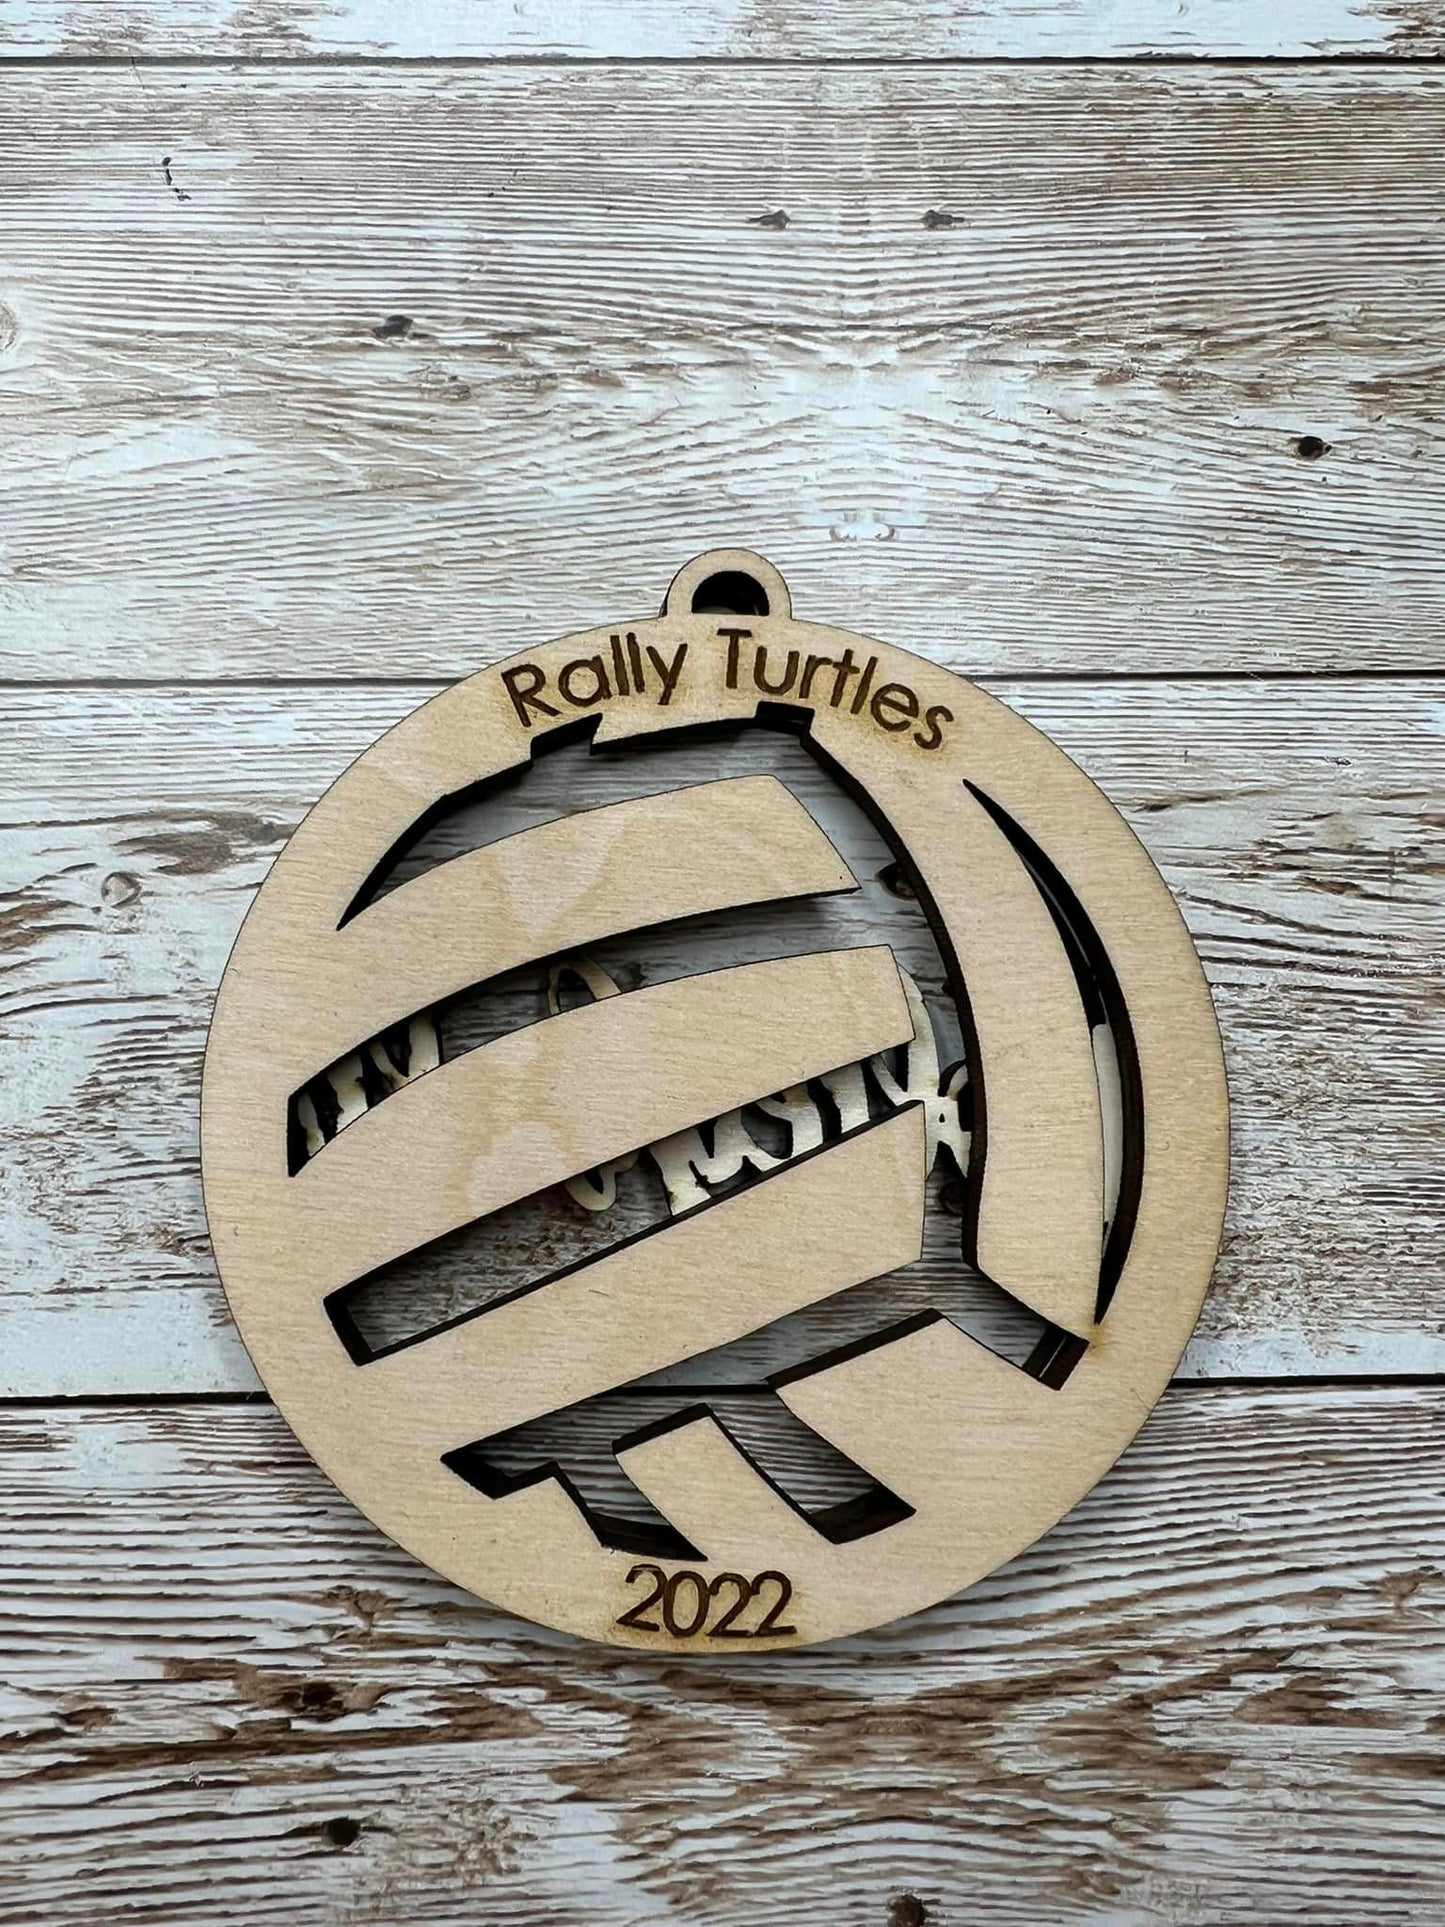 Volleyball Ornament